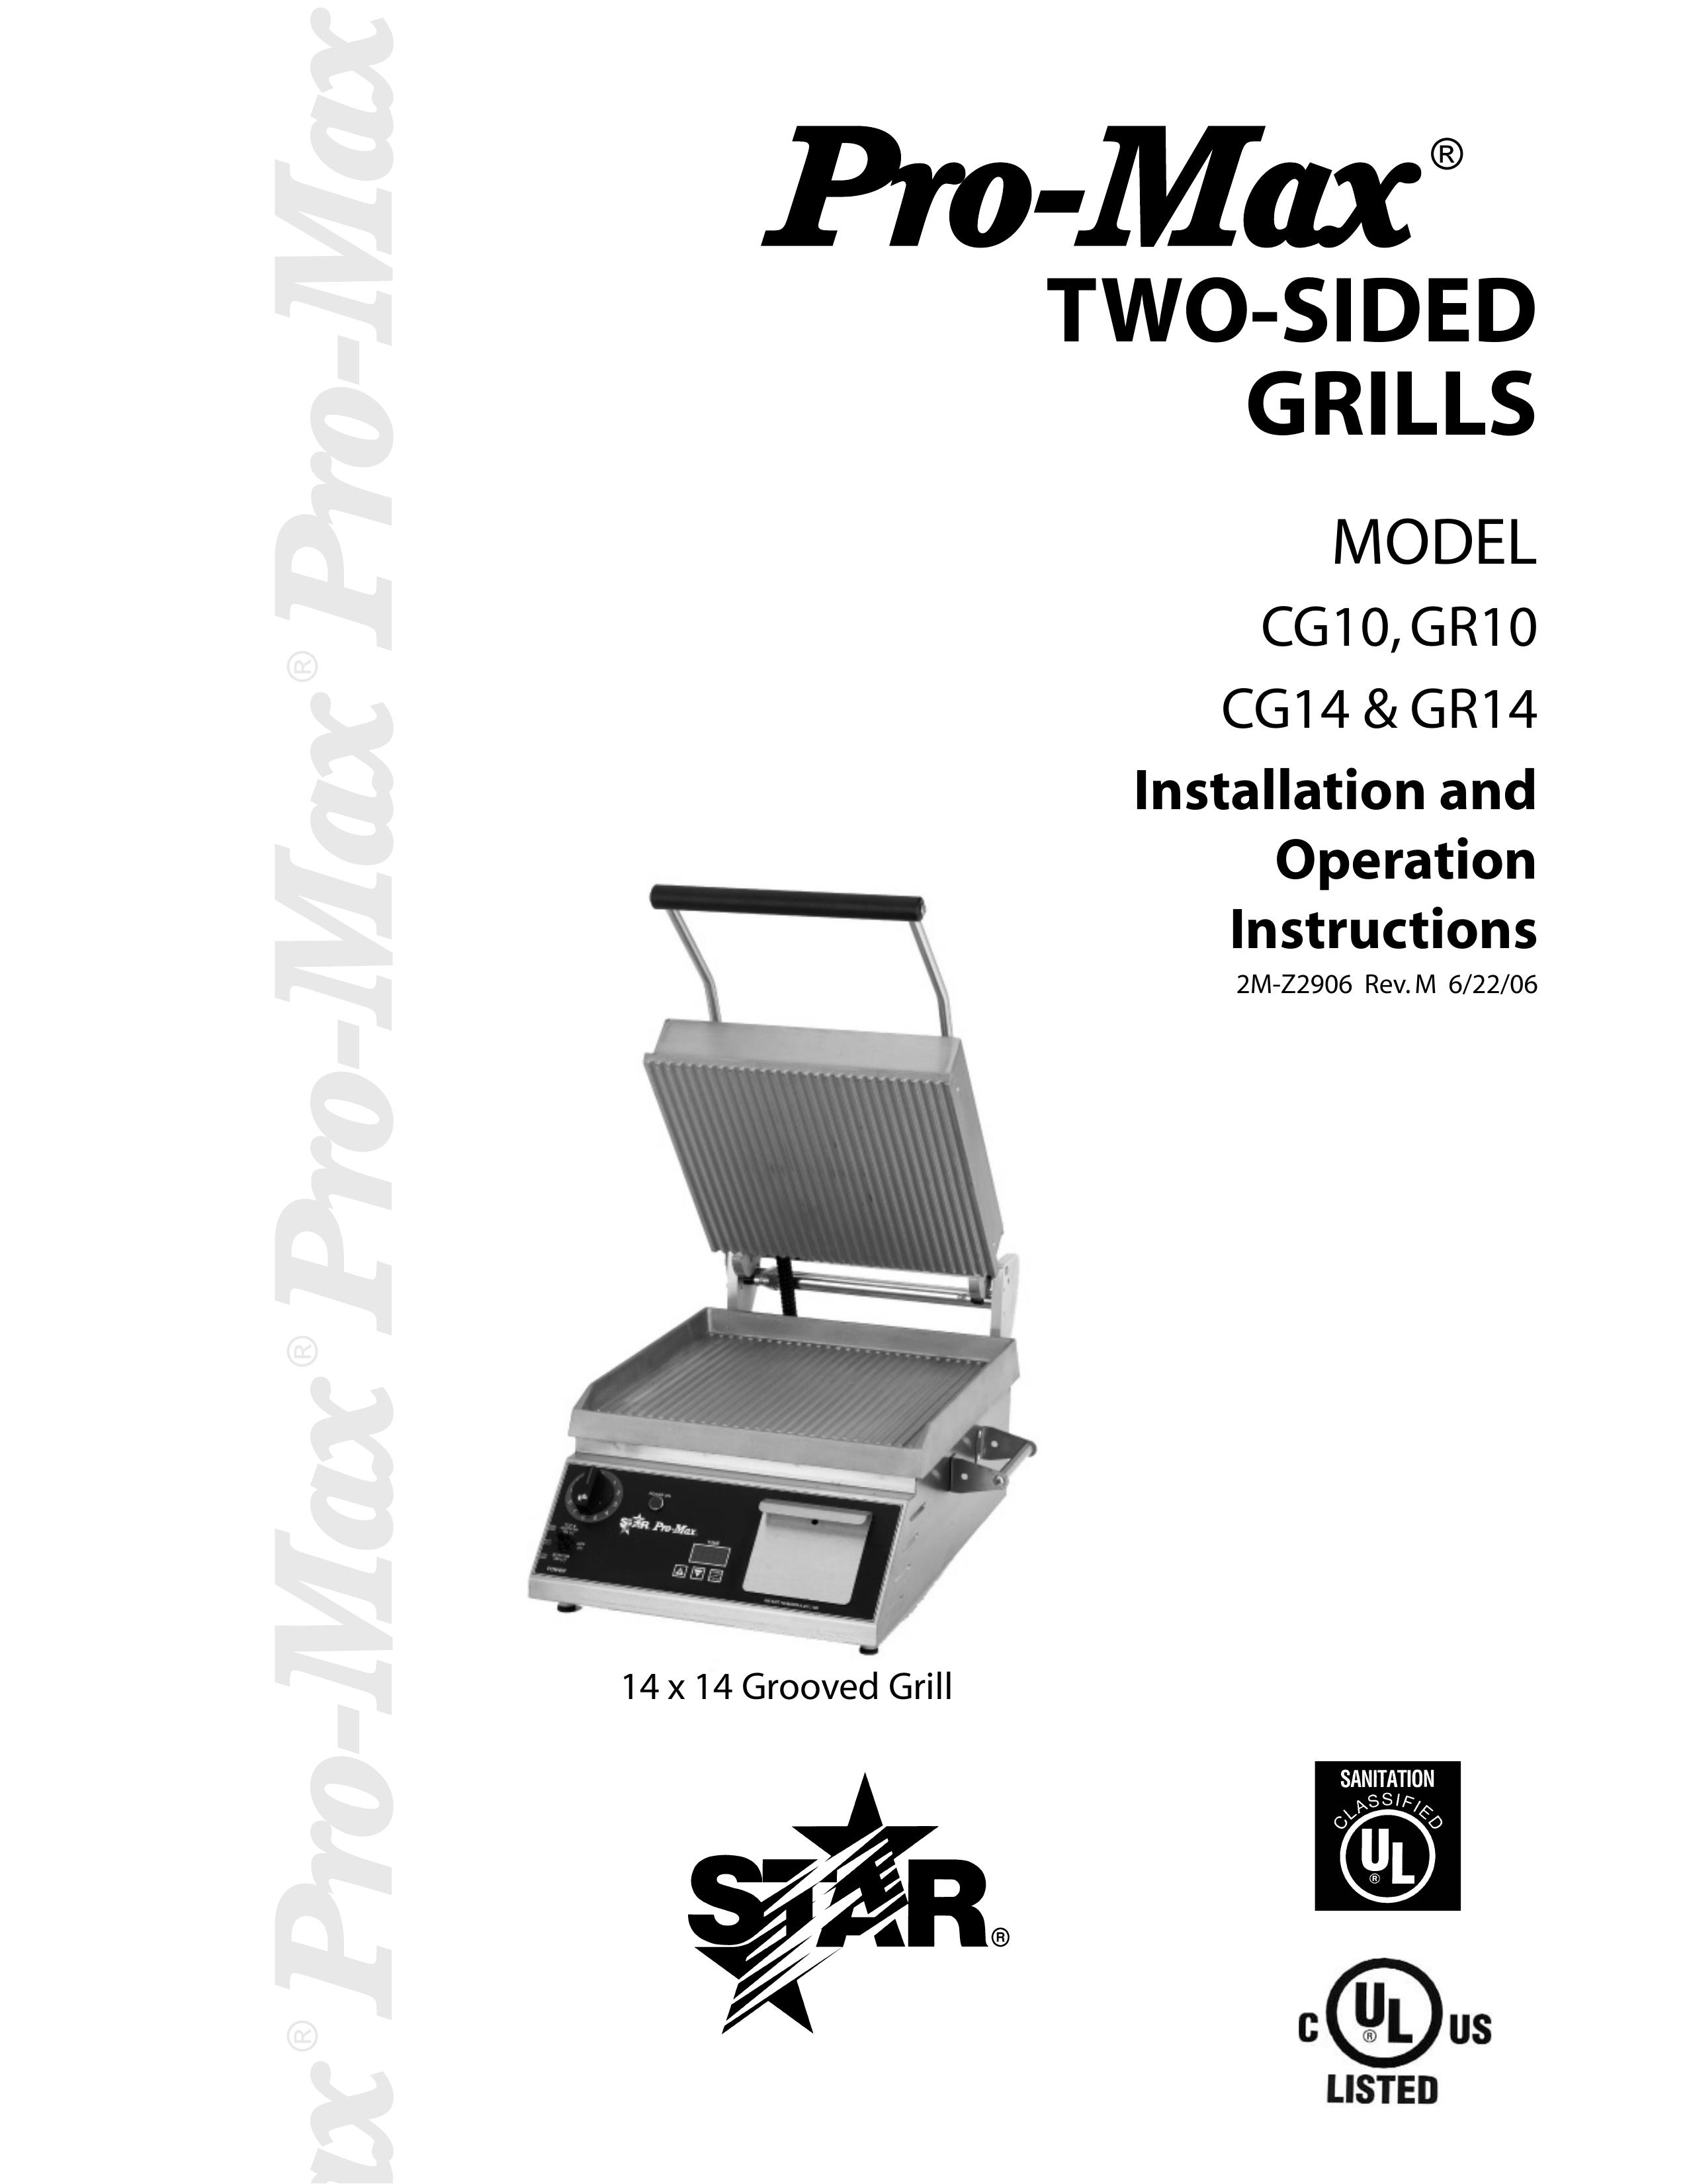 Star Manufacturing GR14 Charcoal Grill User Manual